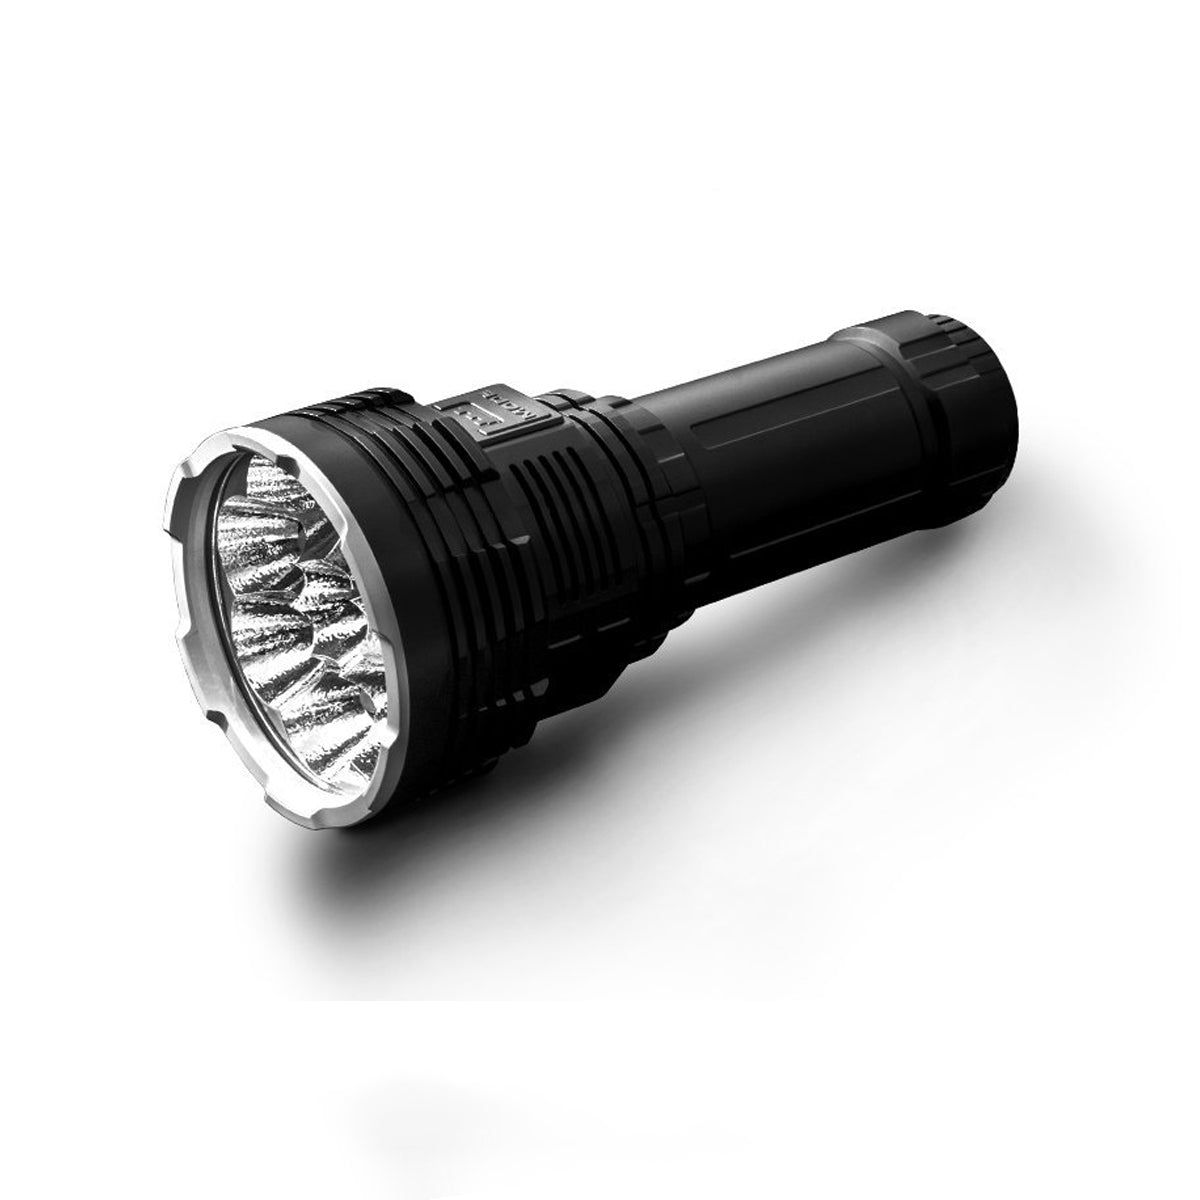 https://www.shoplightjunction.shop/wp-content/uploads/1692/04/explore-our-collection-of-imalent-dx80-8pcs-cree-xhp70-2nd-generation-leds-32000lm-led-flashlight-imalent-that-help-you-be-the-best-you-can-be_0.jpg